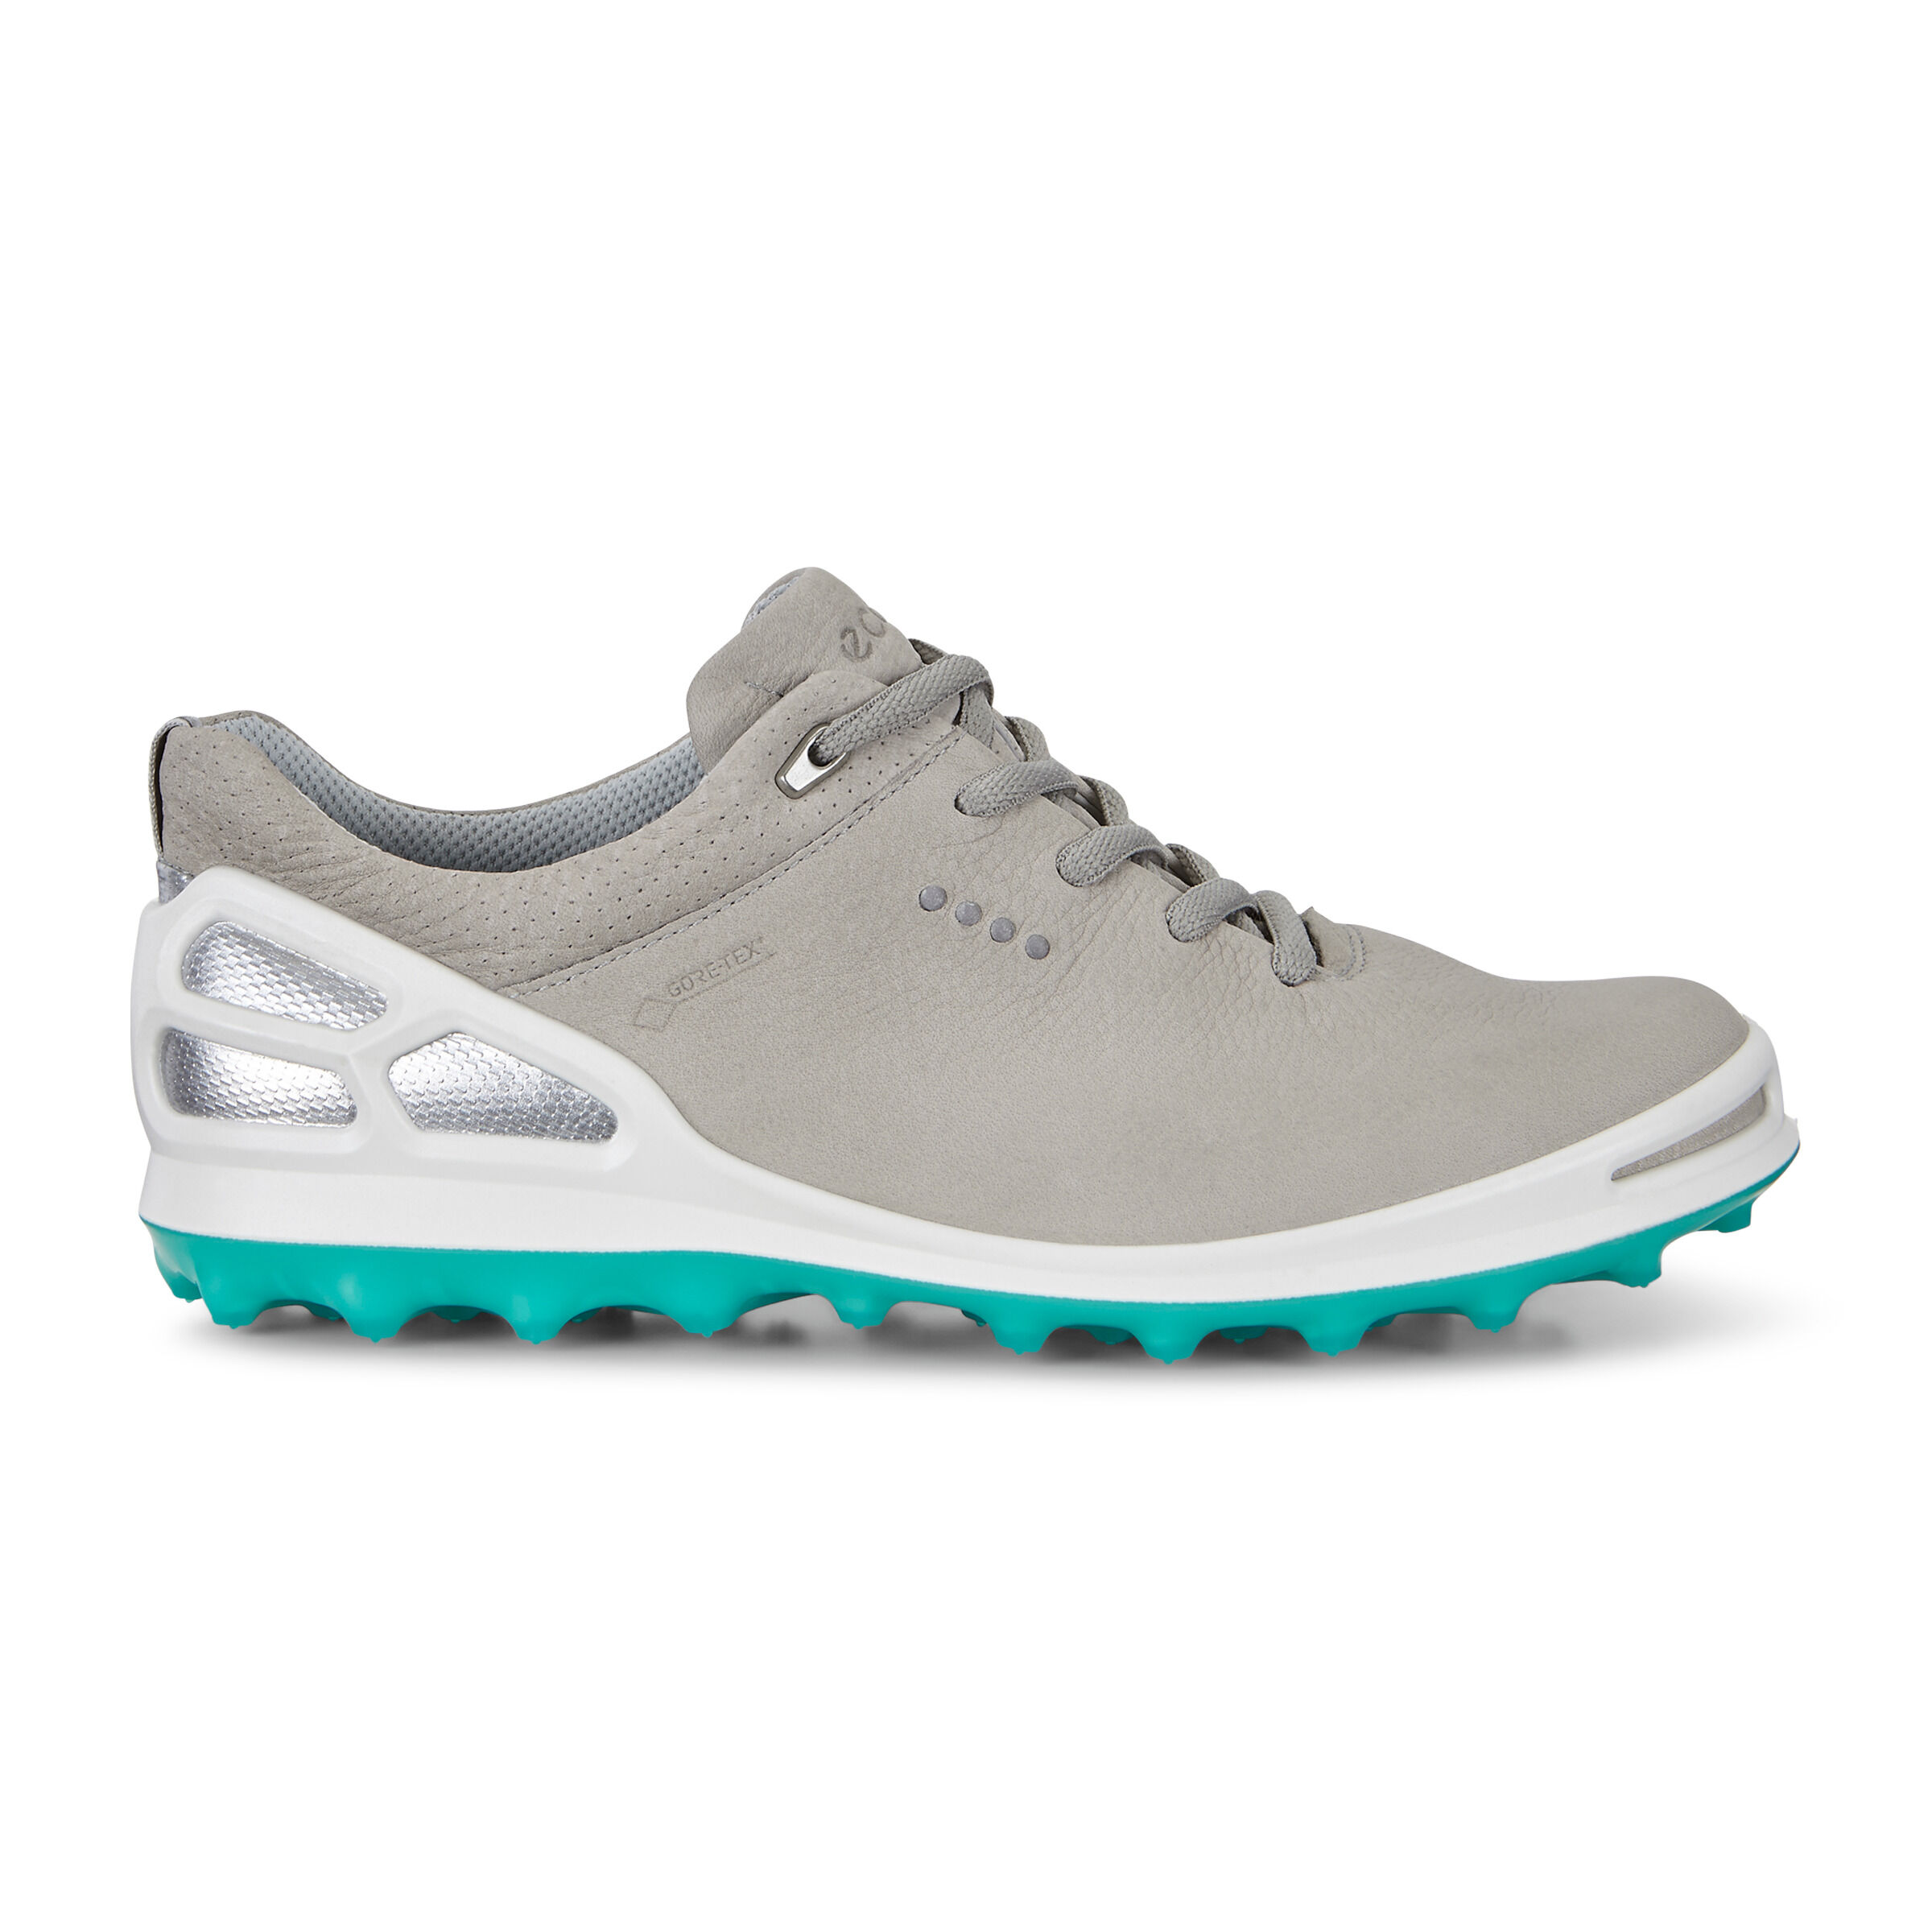 Cage GORE-TEX | Golf Shoes | ECCO® Shoes